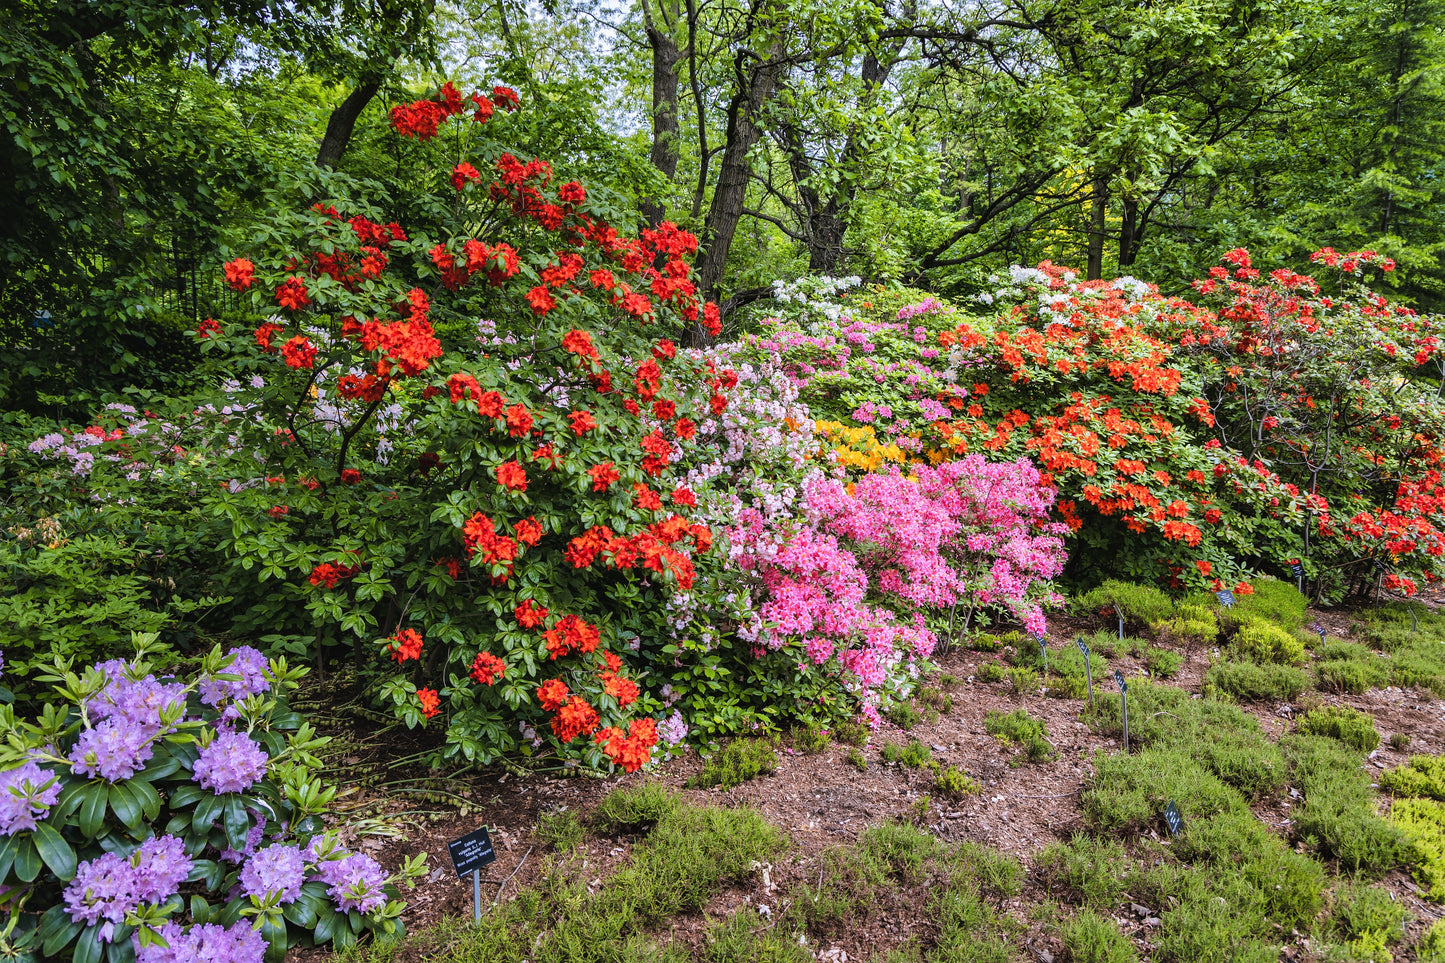 50 MIXED HYBRIDS RHODODENDRON spp. Mixed Colors - Red, Pink, Purple, White, Yellow, Orange Flower Sun or Shade Bush Shrub Seeds